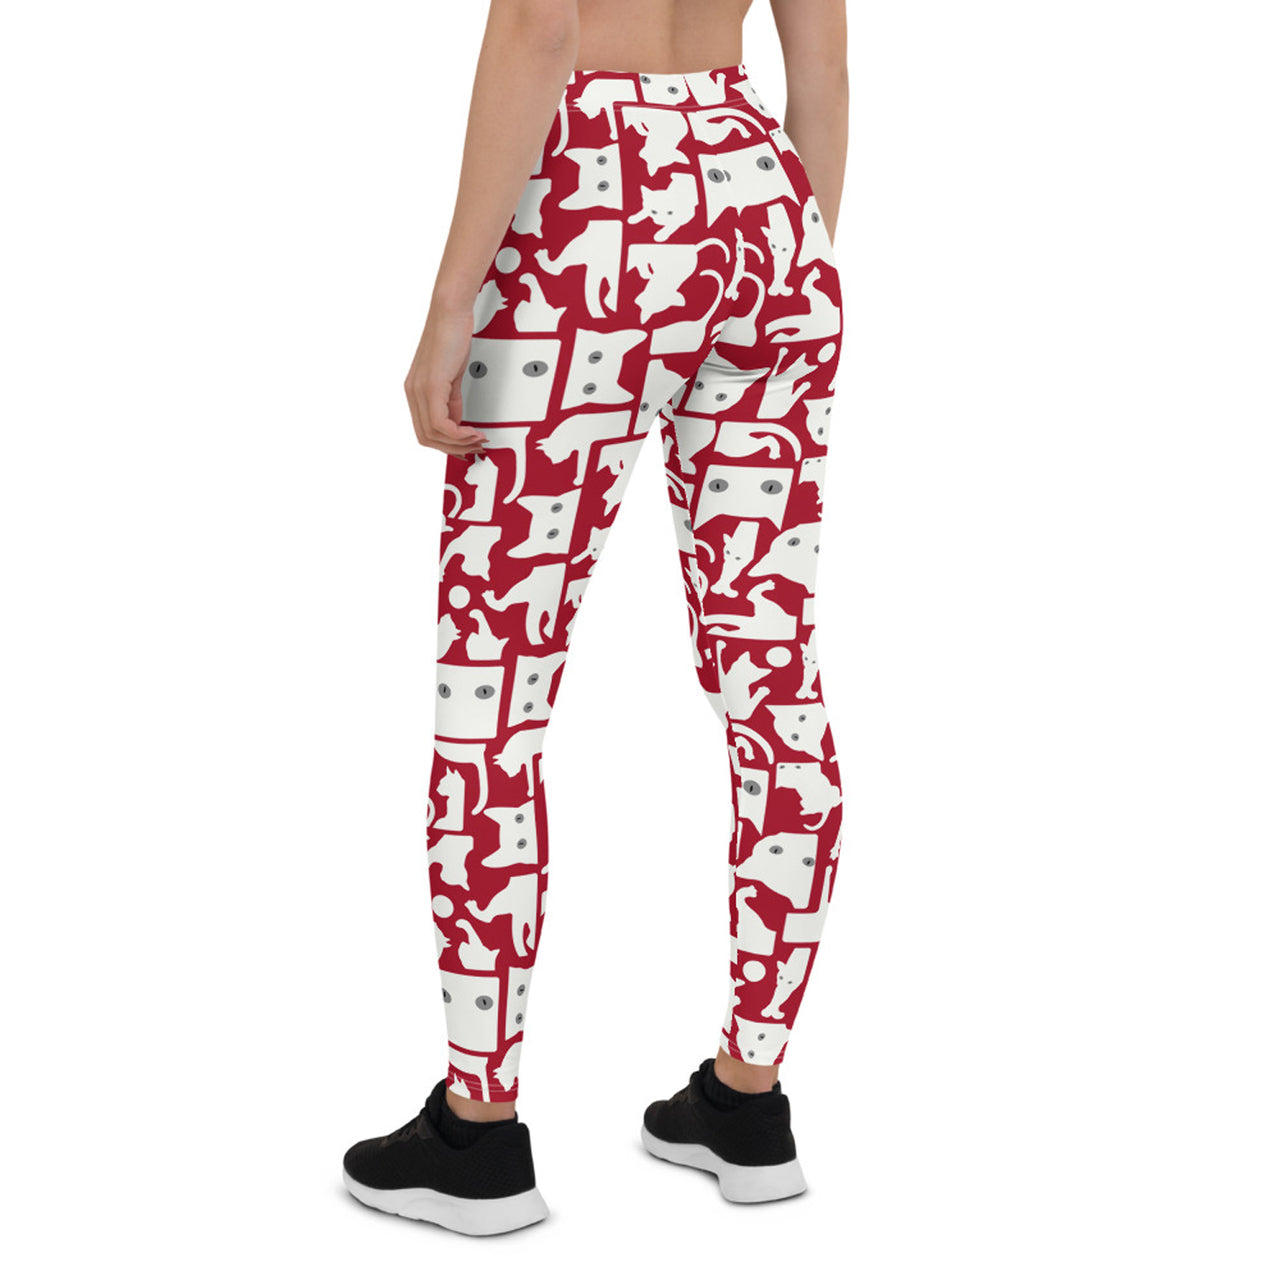 white and red leggings with cat pattern